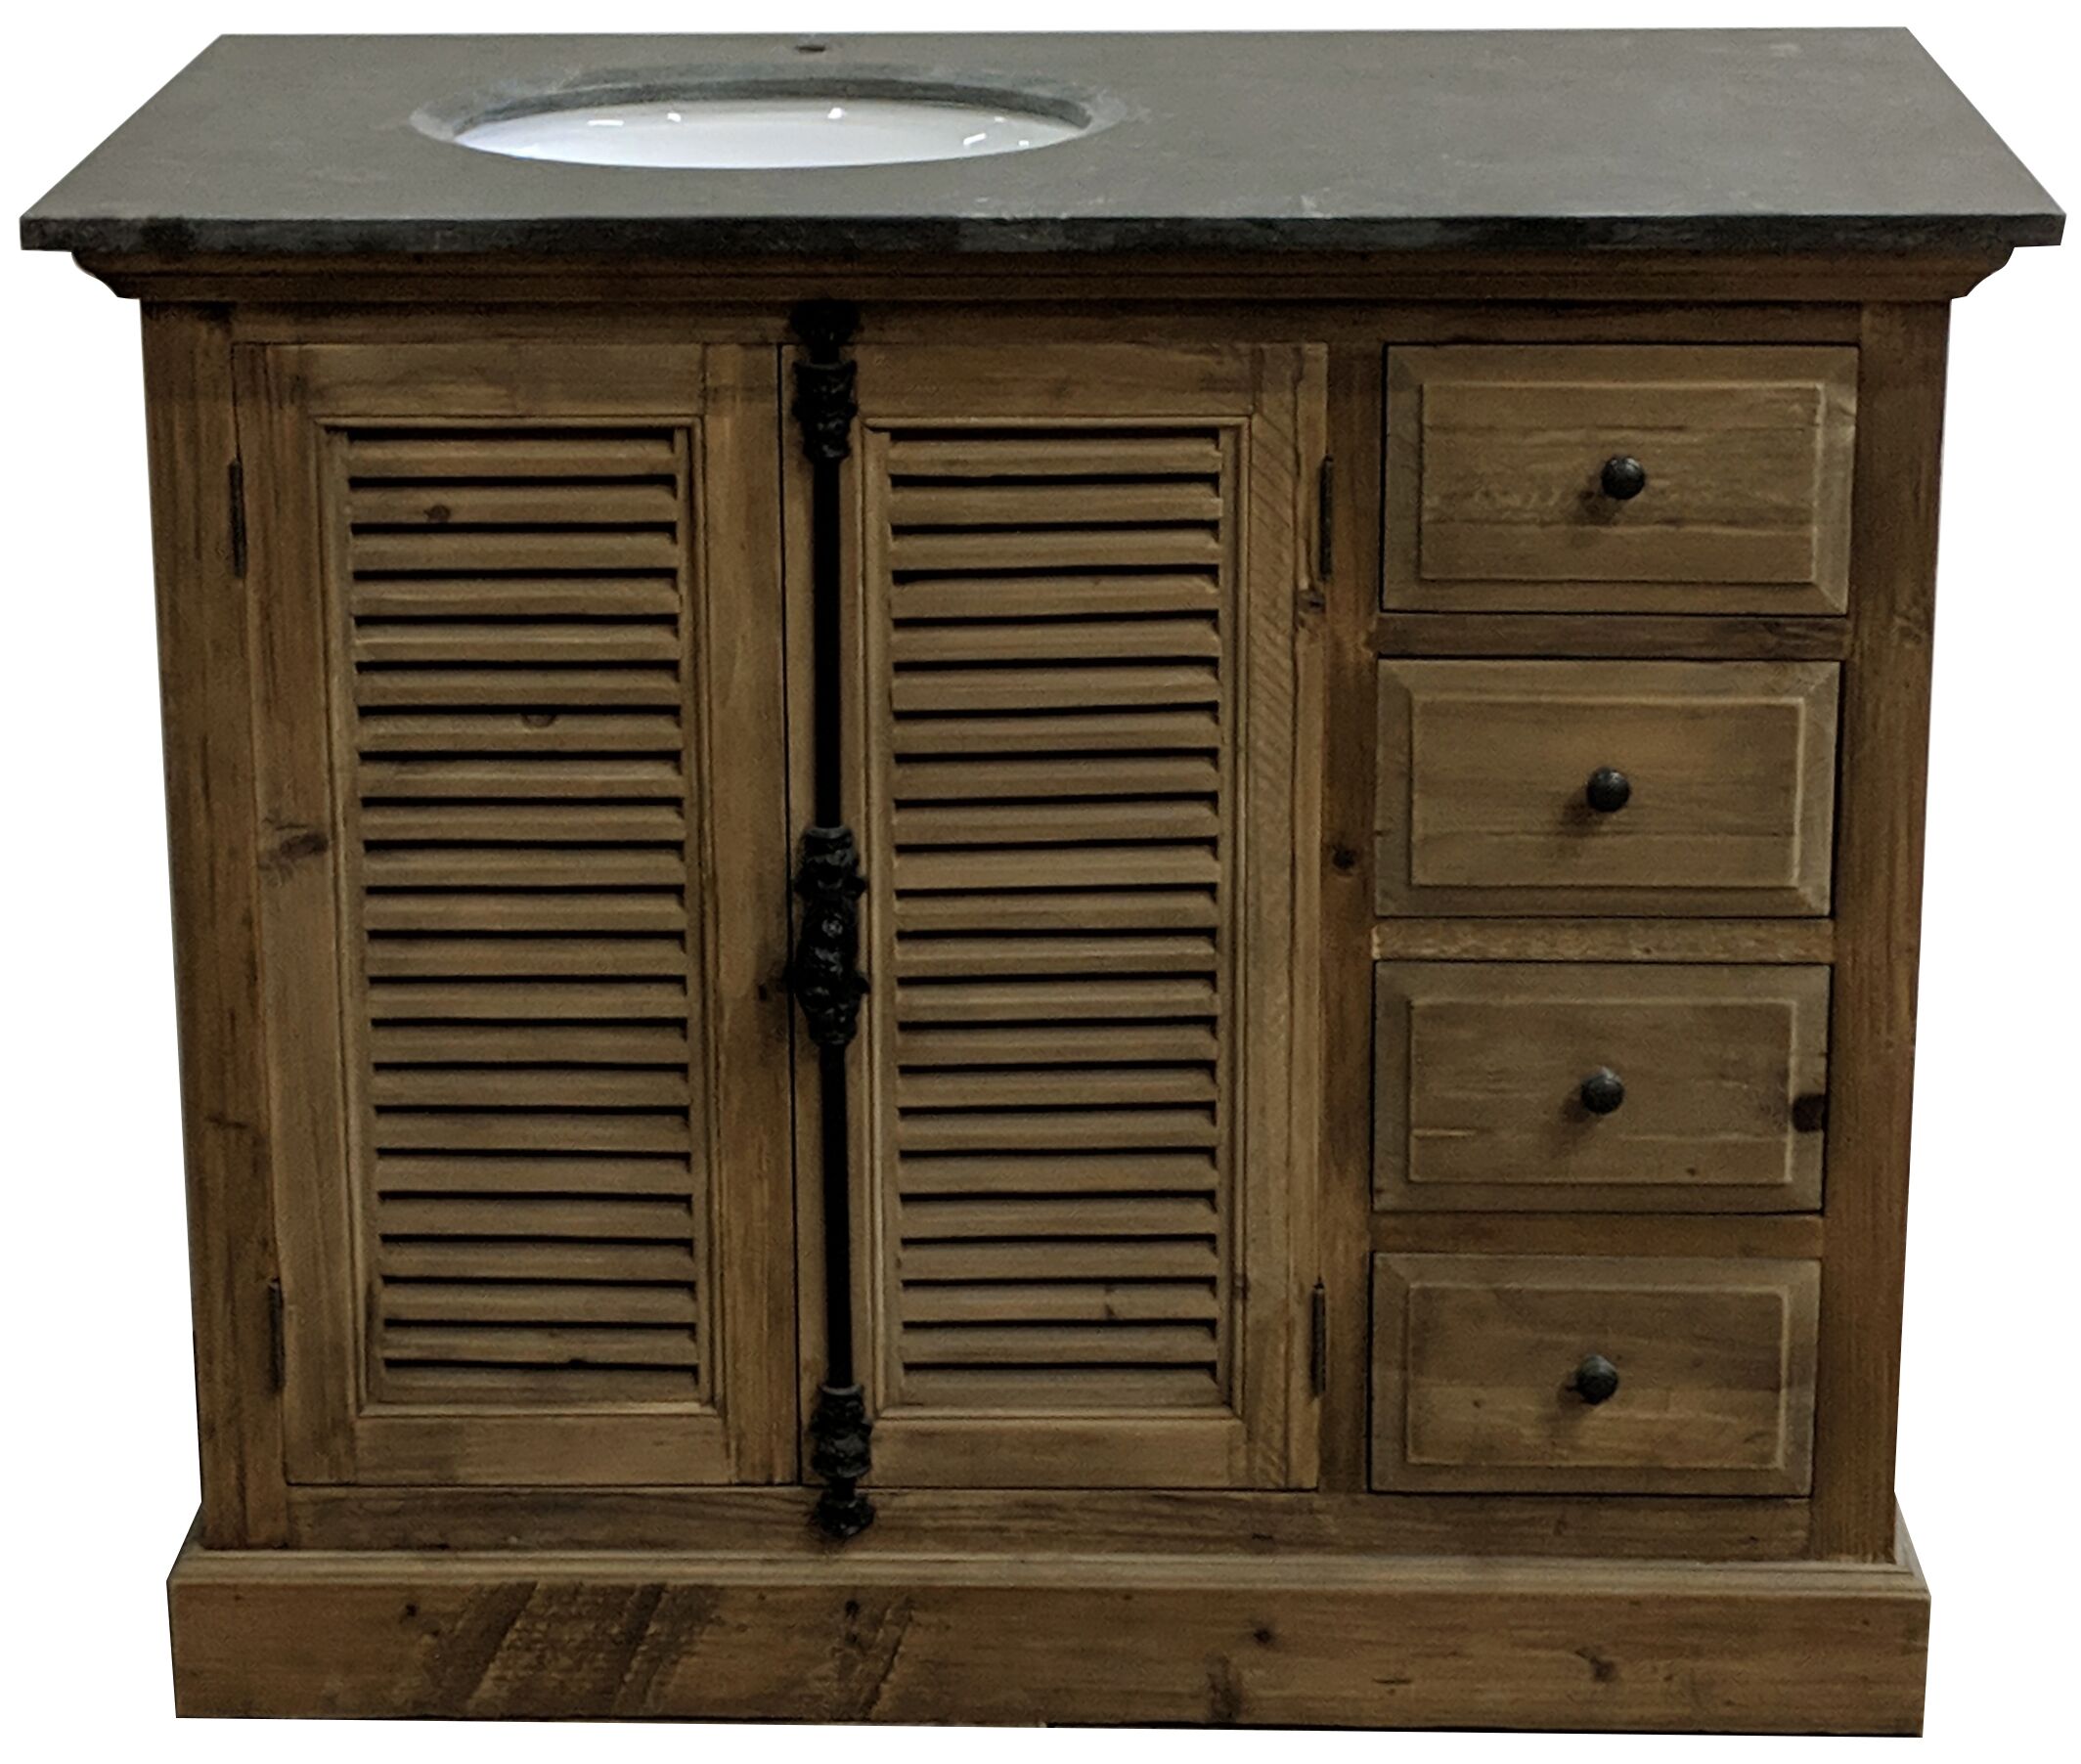 43" Handcrafted Reclaimed Pine Solid Wood Single Bath Vanity Natural Finish